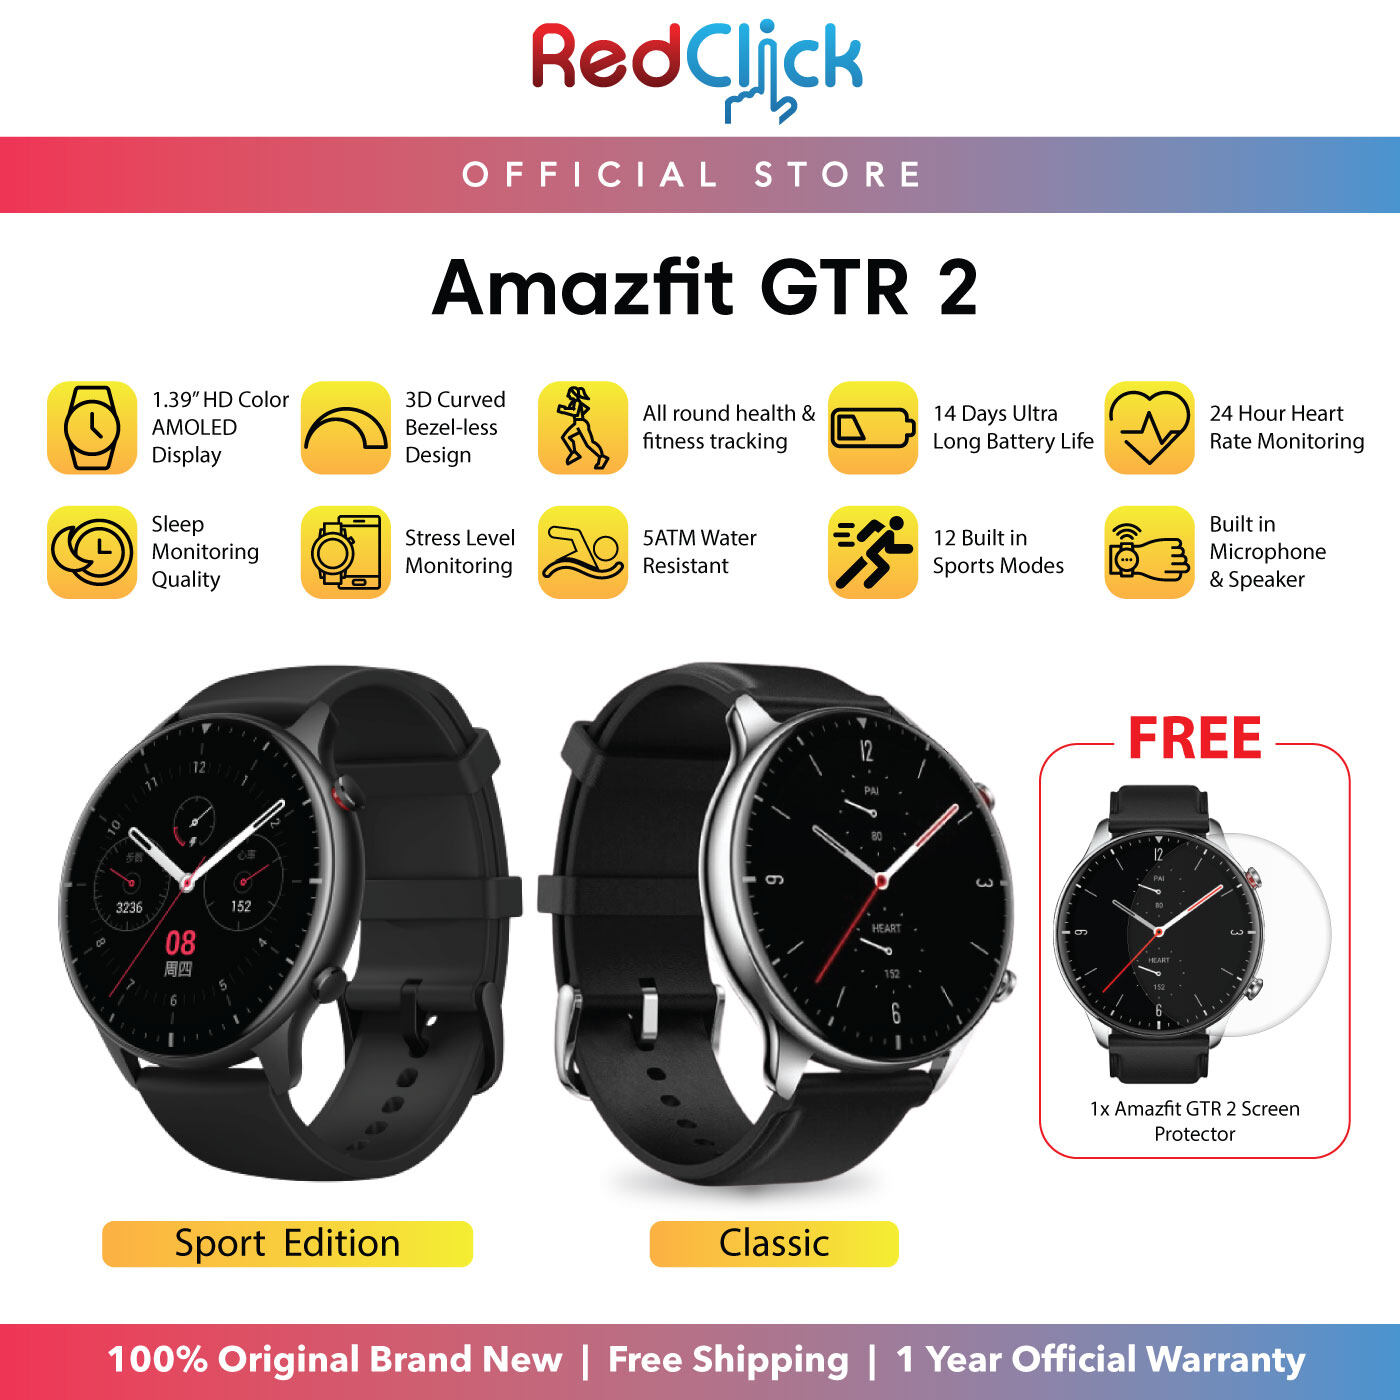 Amazfit GTR 3 / GTR 2 1.39" AMOLED Display 3D Curved Bezel-less Design Music Storage 14-Day Ultra-Long Battery Life Built-in Mic And Speaker Support Phone Call + Free Gift